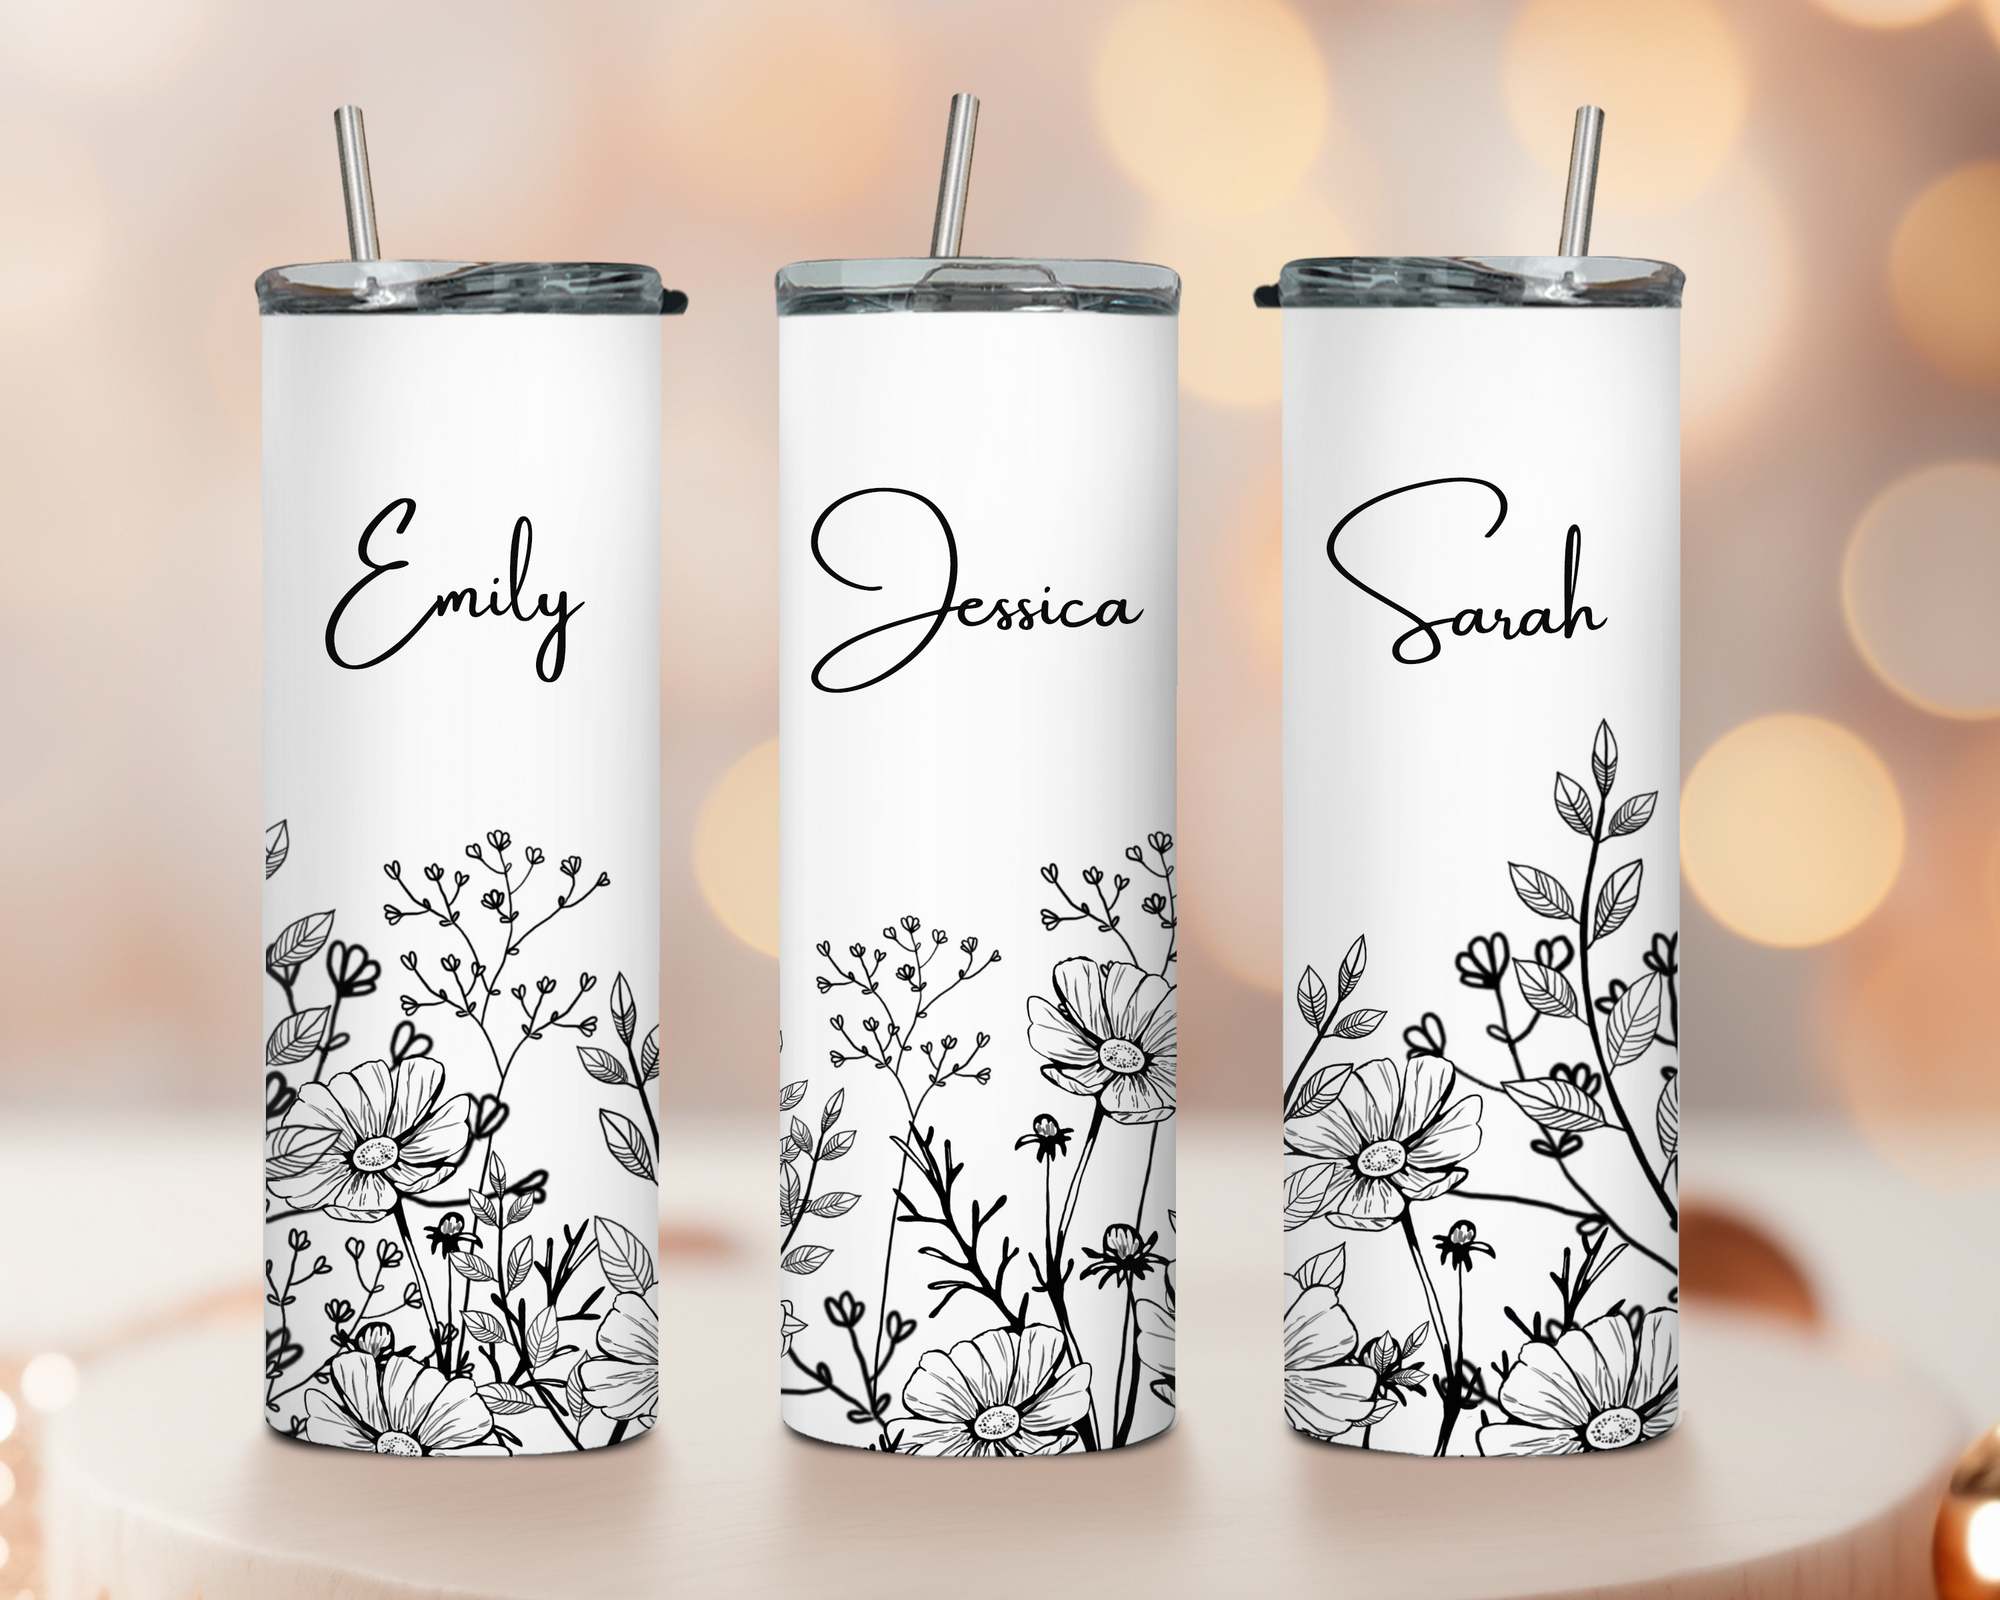 Red Robot Engraving Personalized Bridesmaid Tumblers- Customized Stainless  Steel Cups for your Wedding, Bride or Bridal party - Single Cup Engraved